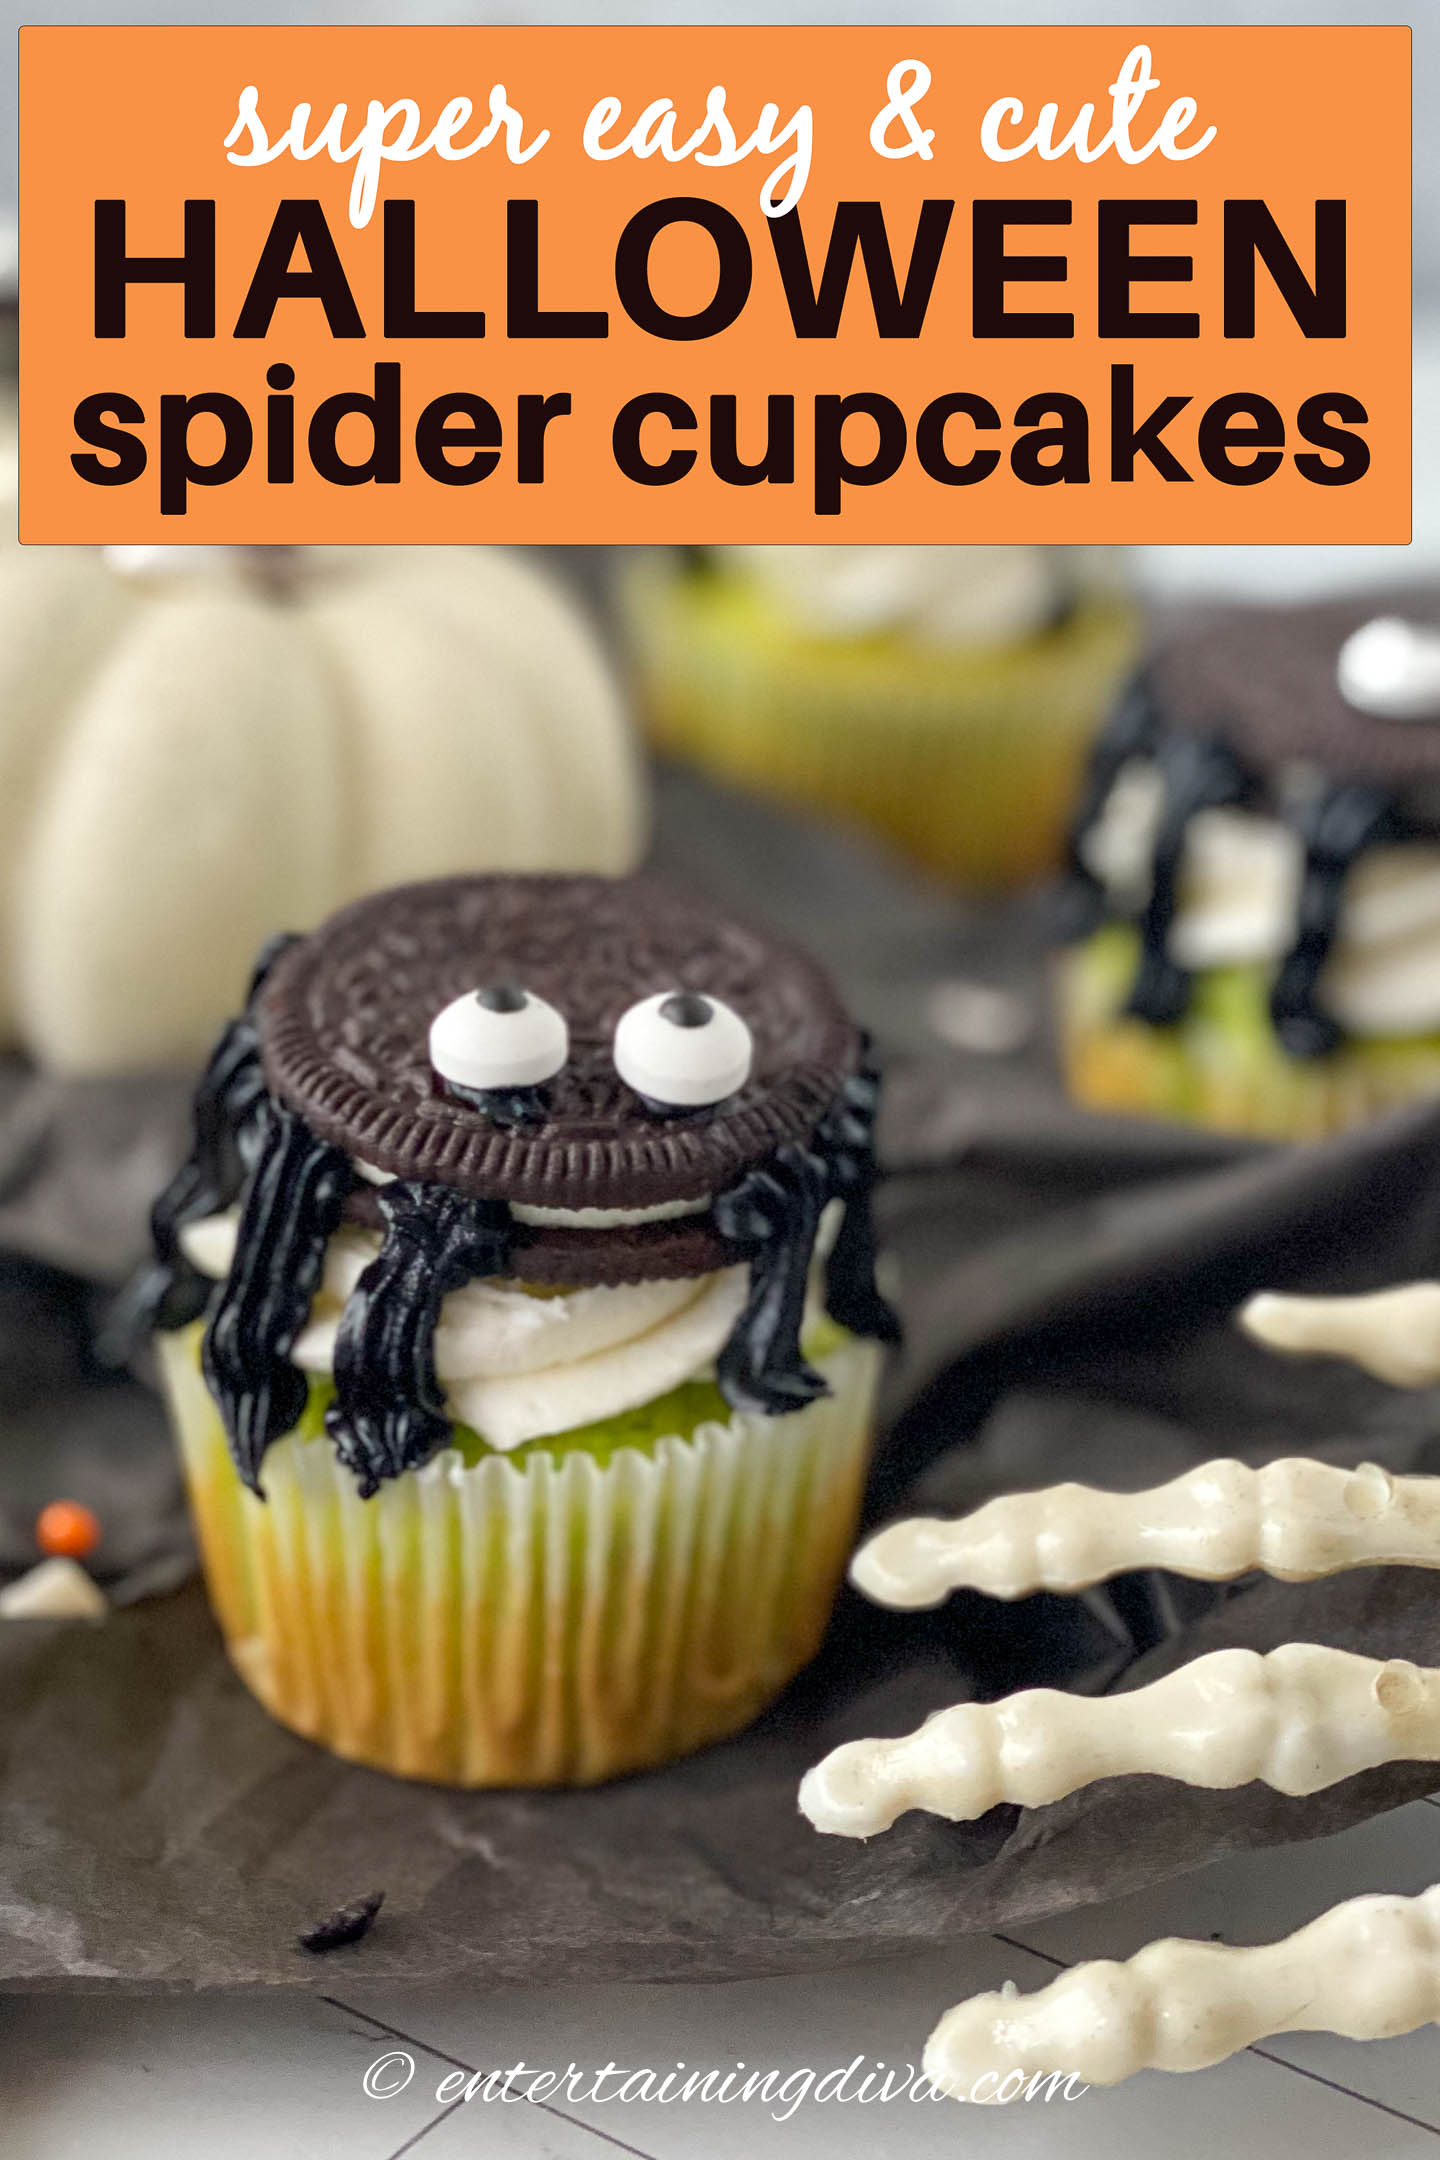 super easy and cute Halloween spider cupcakes